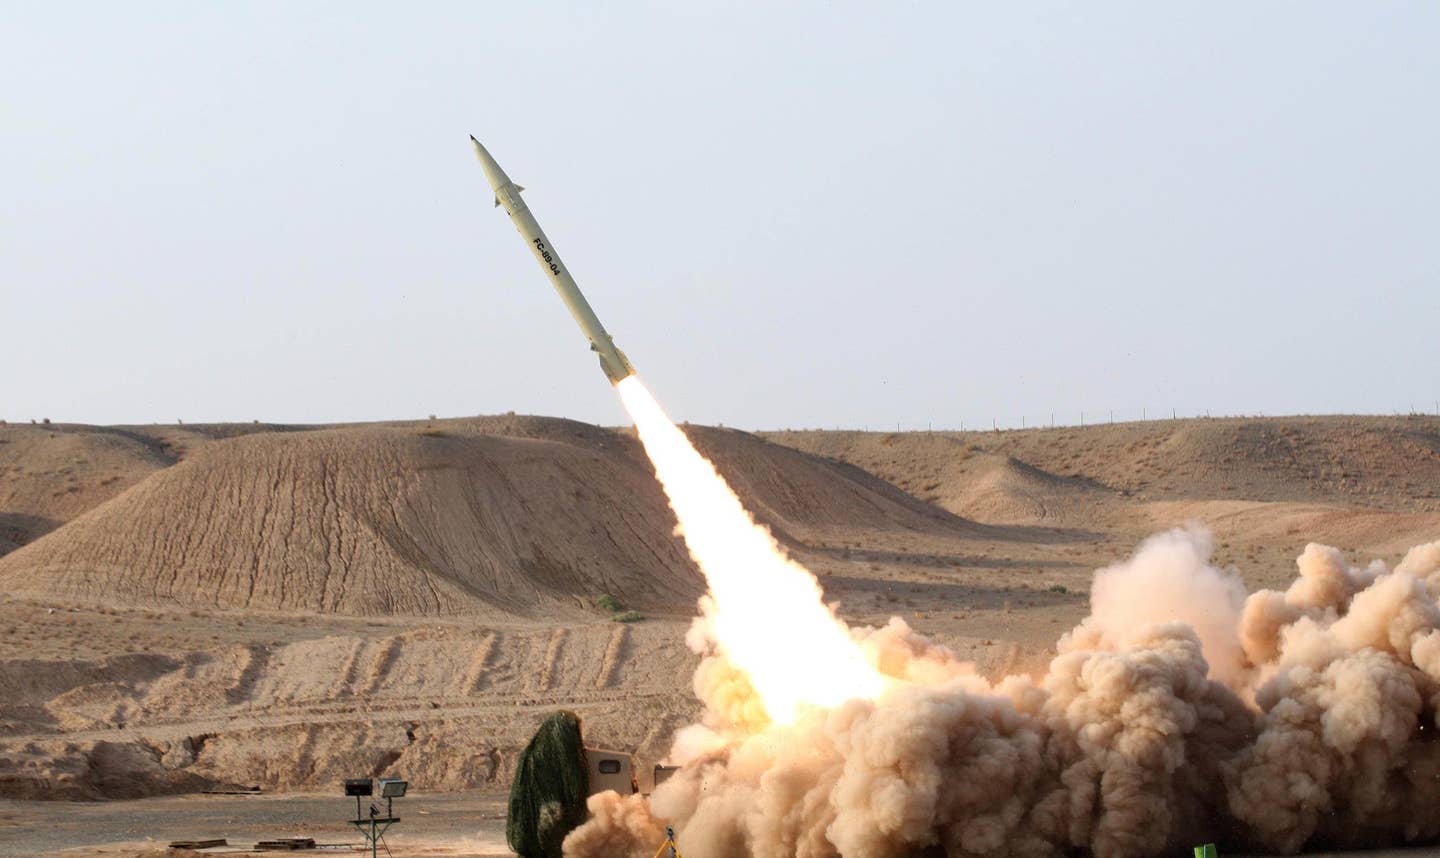 Iran test-fires its surface-to-surface Fateh 110 missile like those that will supposedly be sent to Russia. (Photo by Mohsen Shandiz/Corbis via Getty Images)